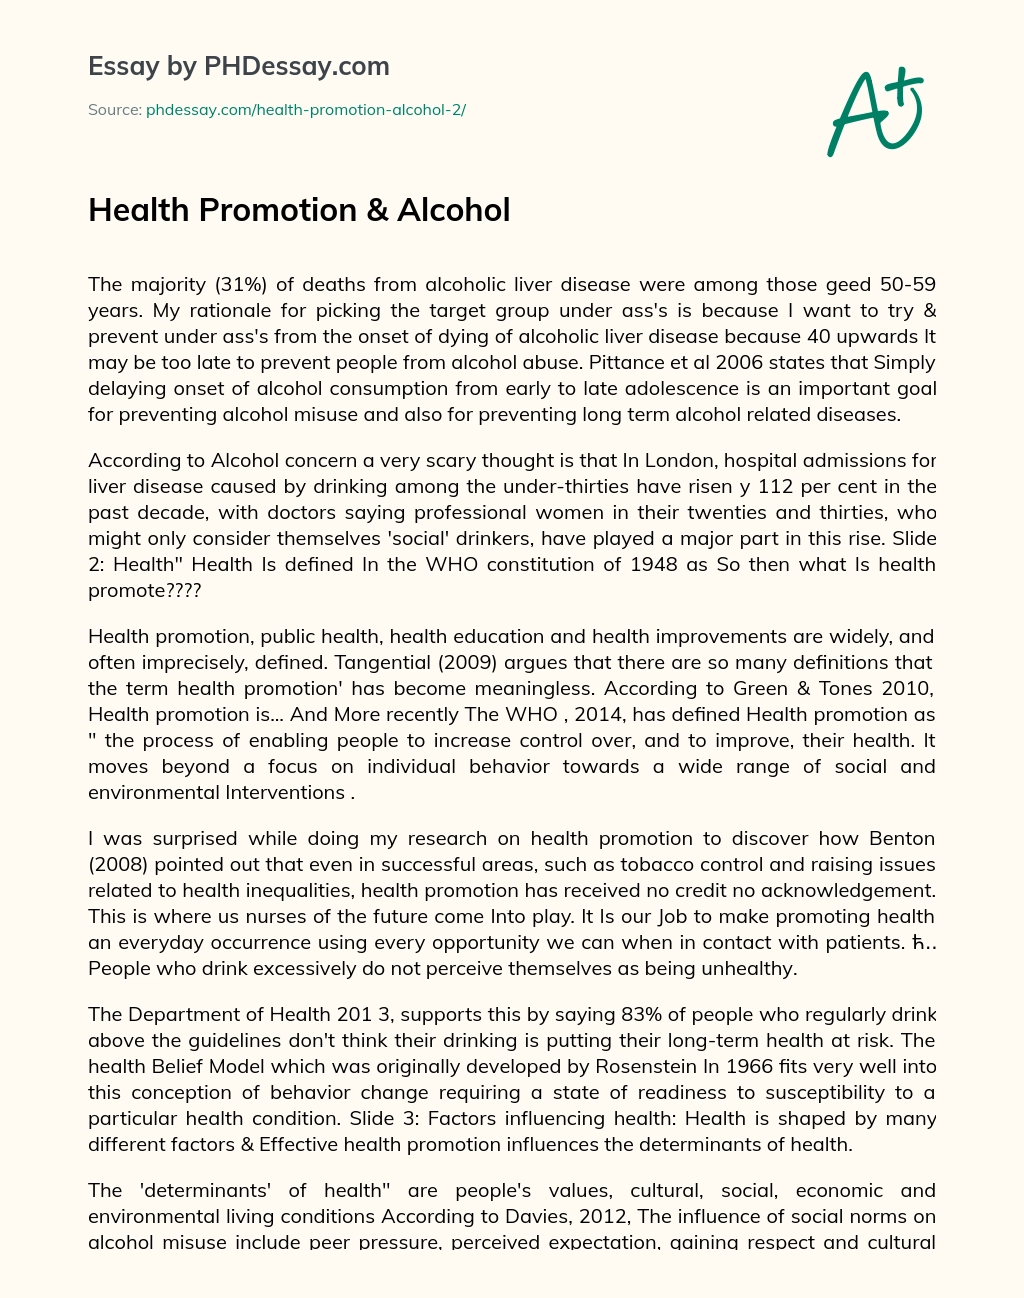 health promotion essay on alcohol